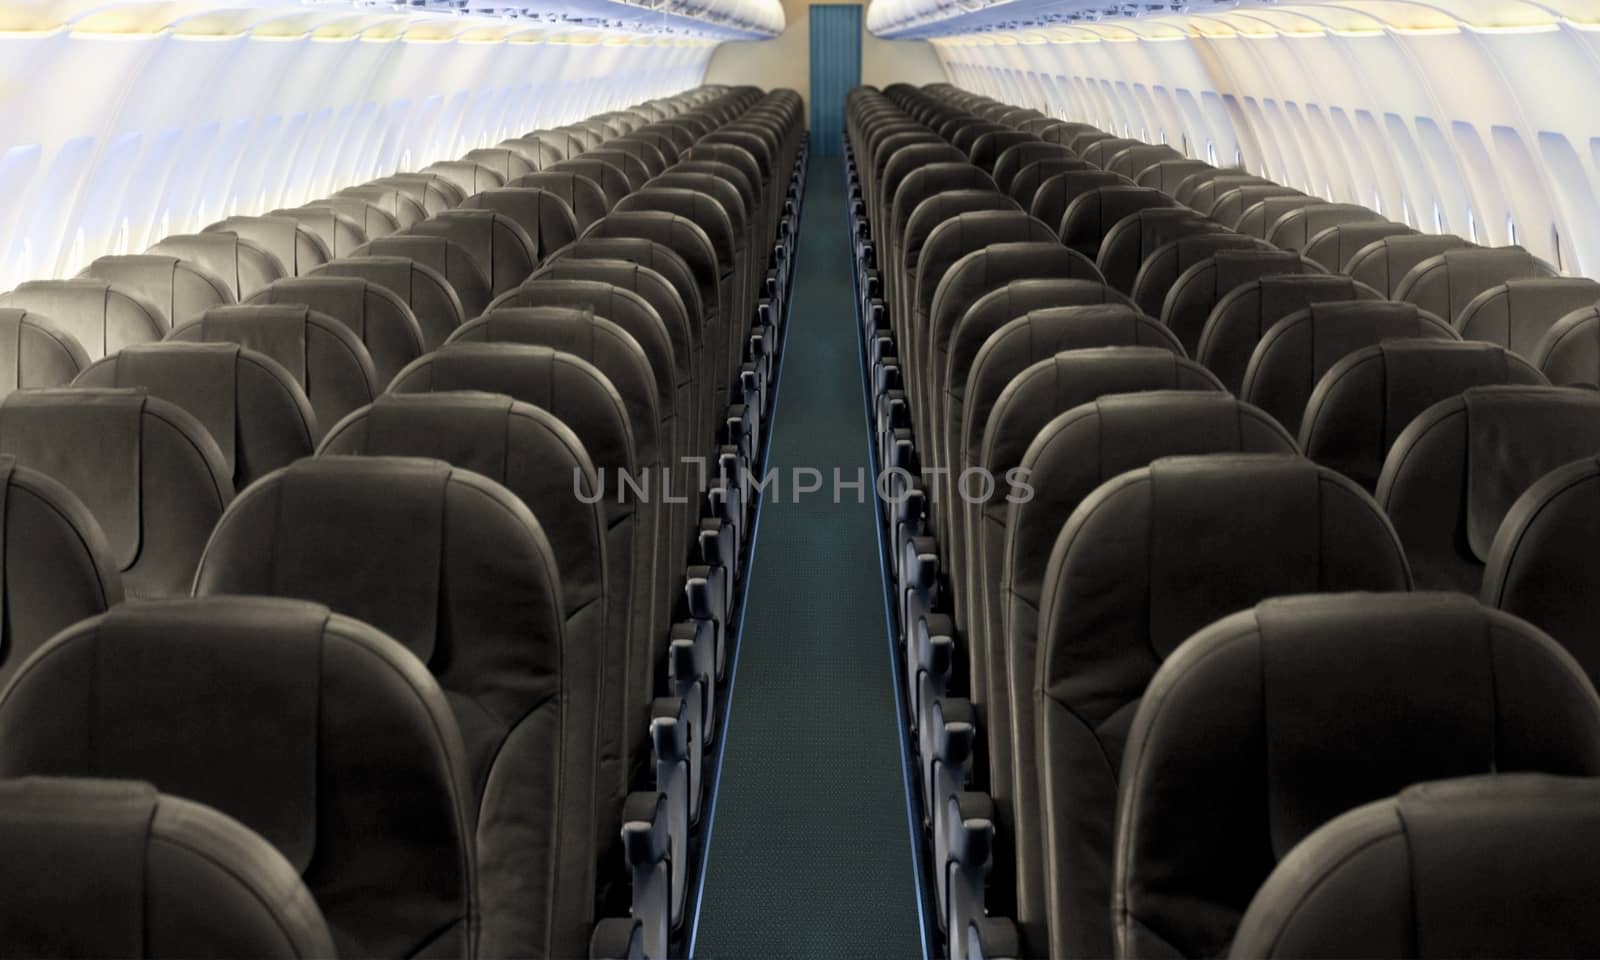 Airplane aisle with row of seats by razihusin